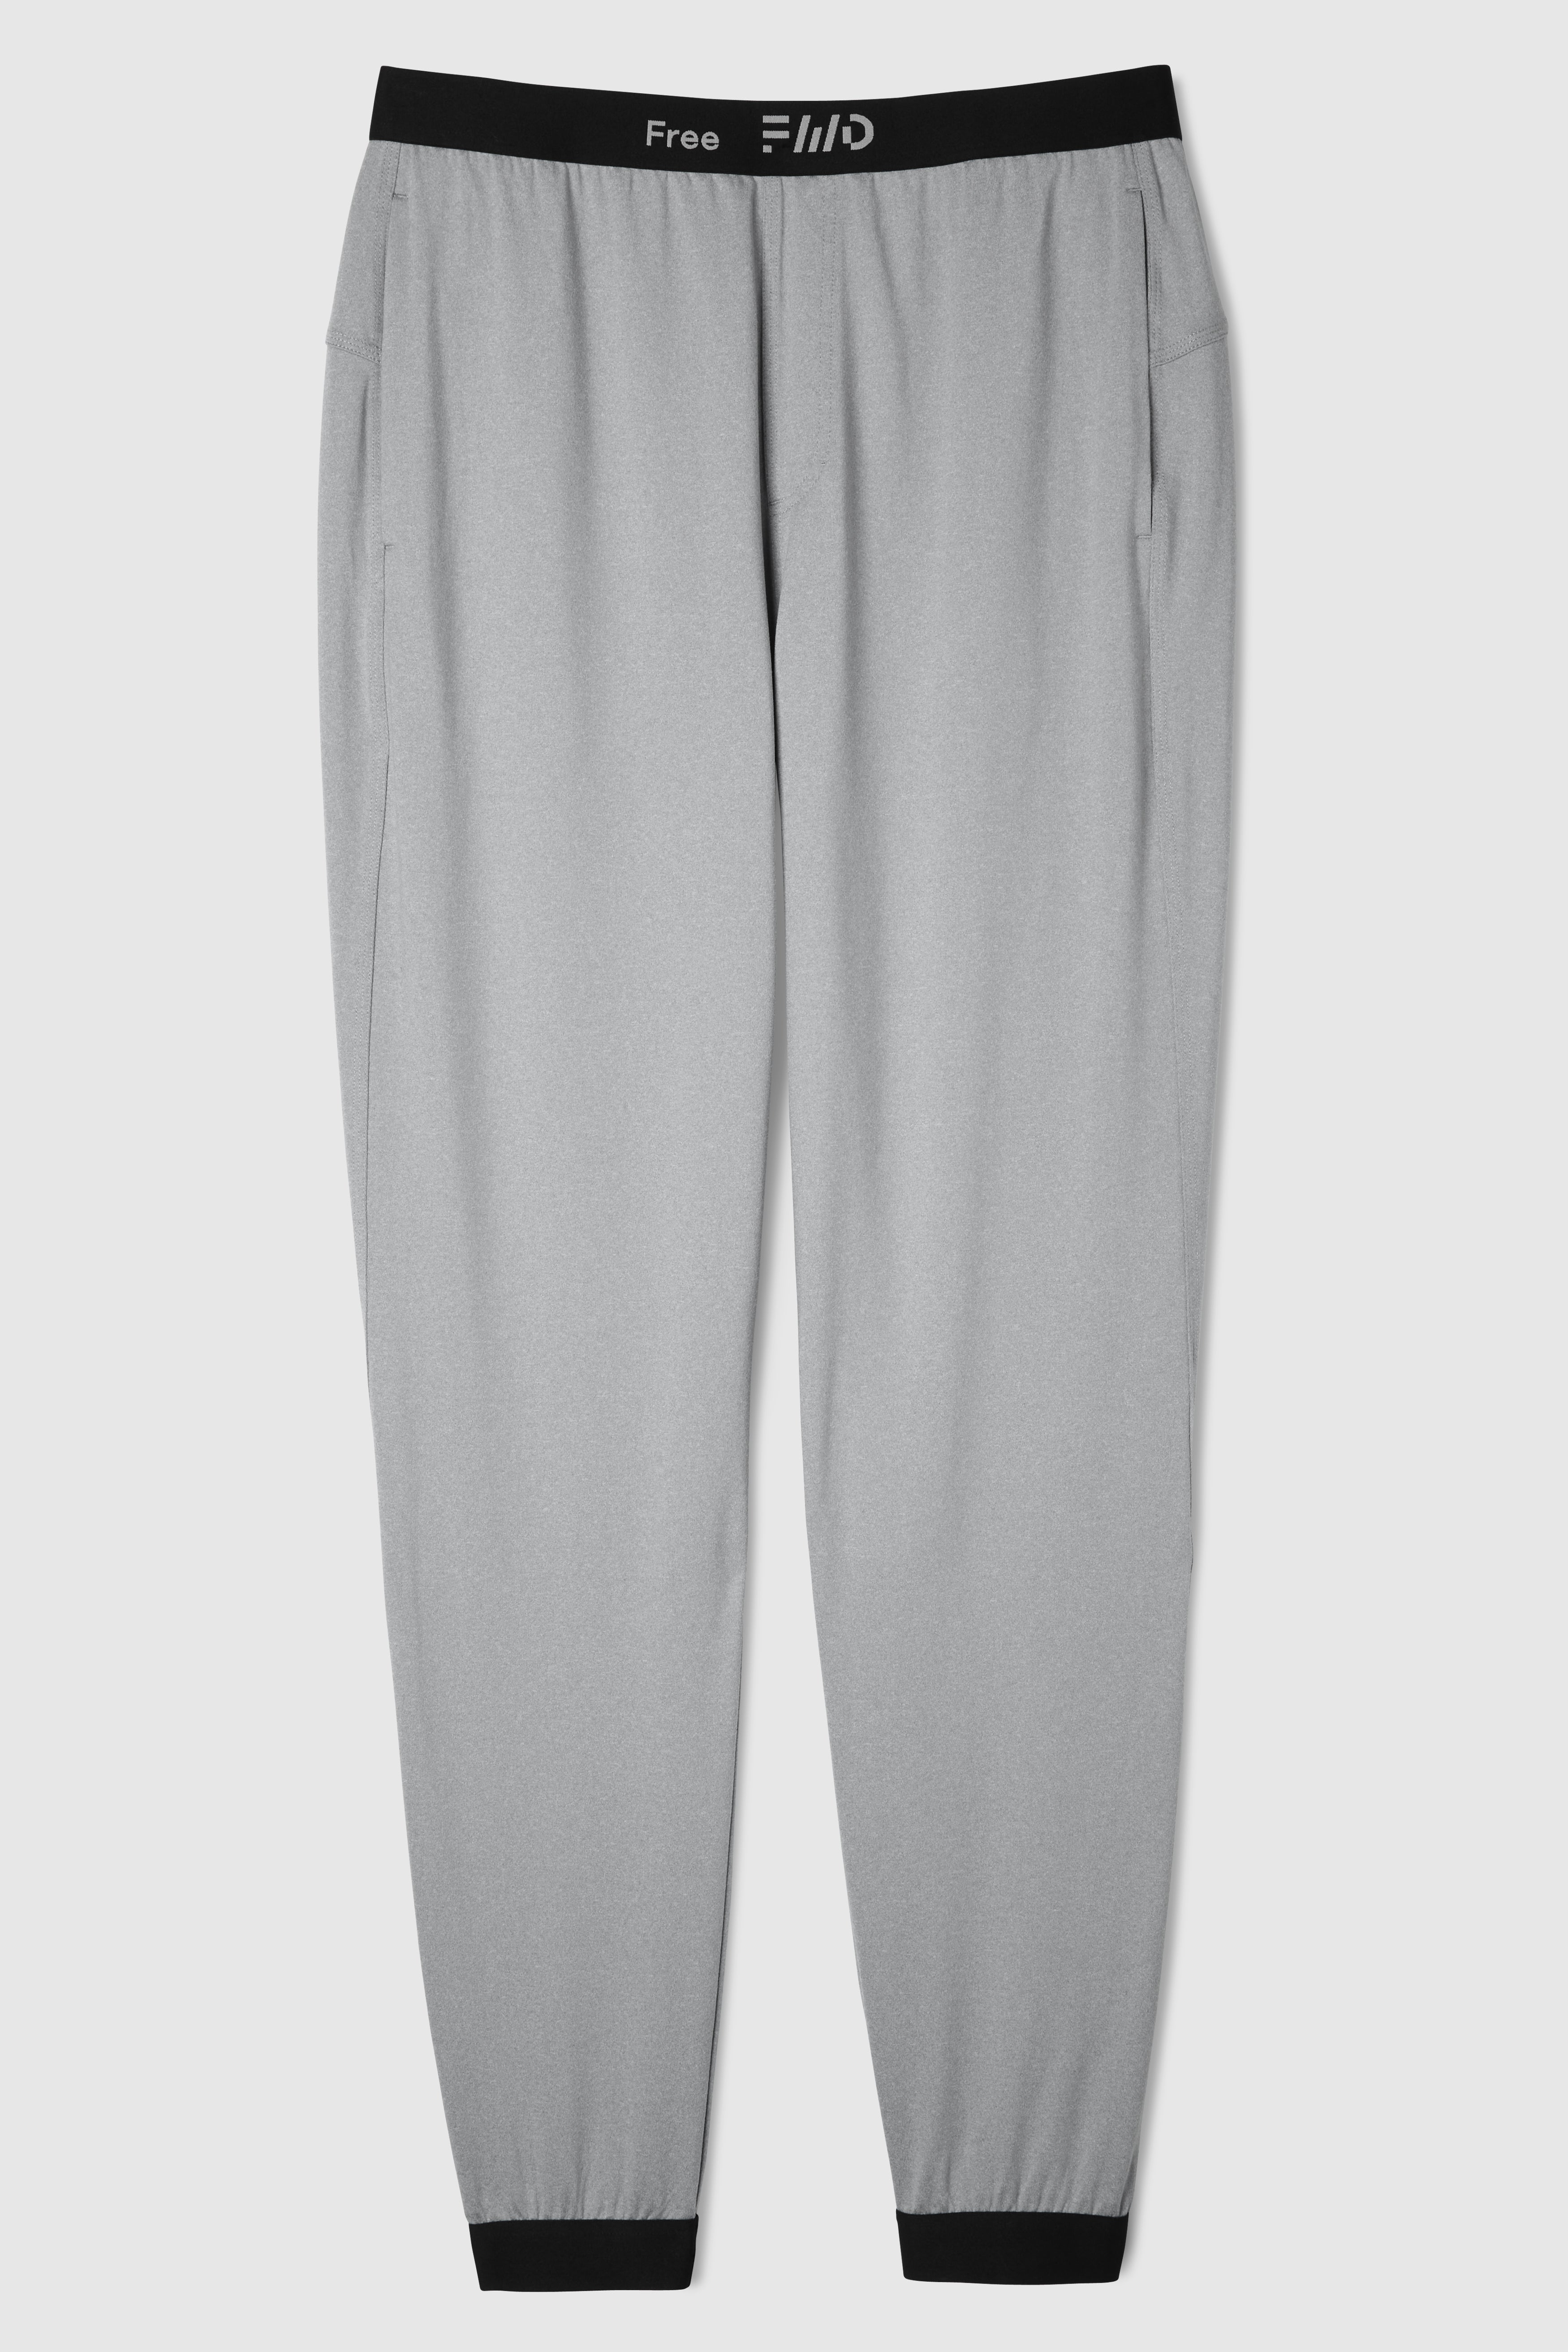 Buy Blissclub Women Grey Move All Day Pants Regular with